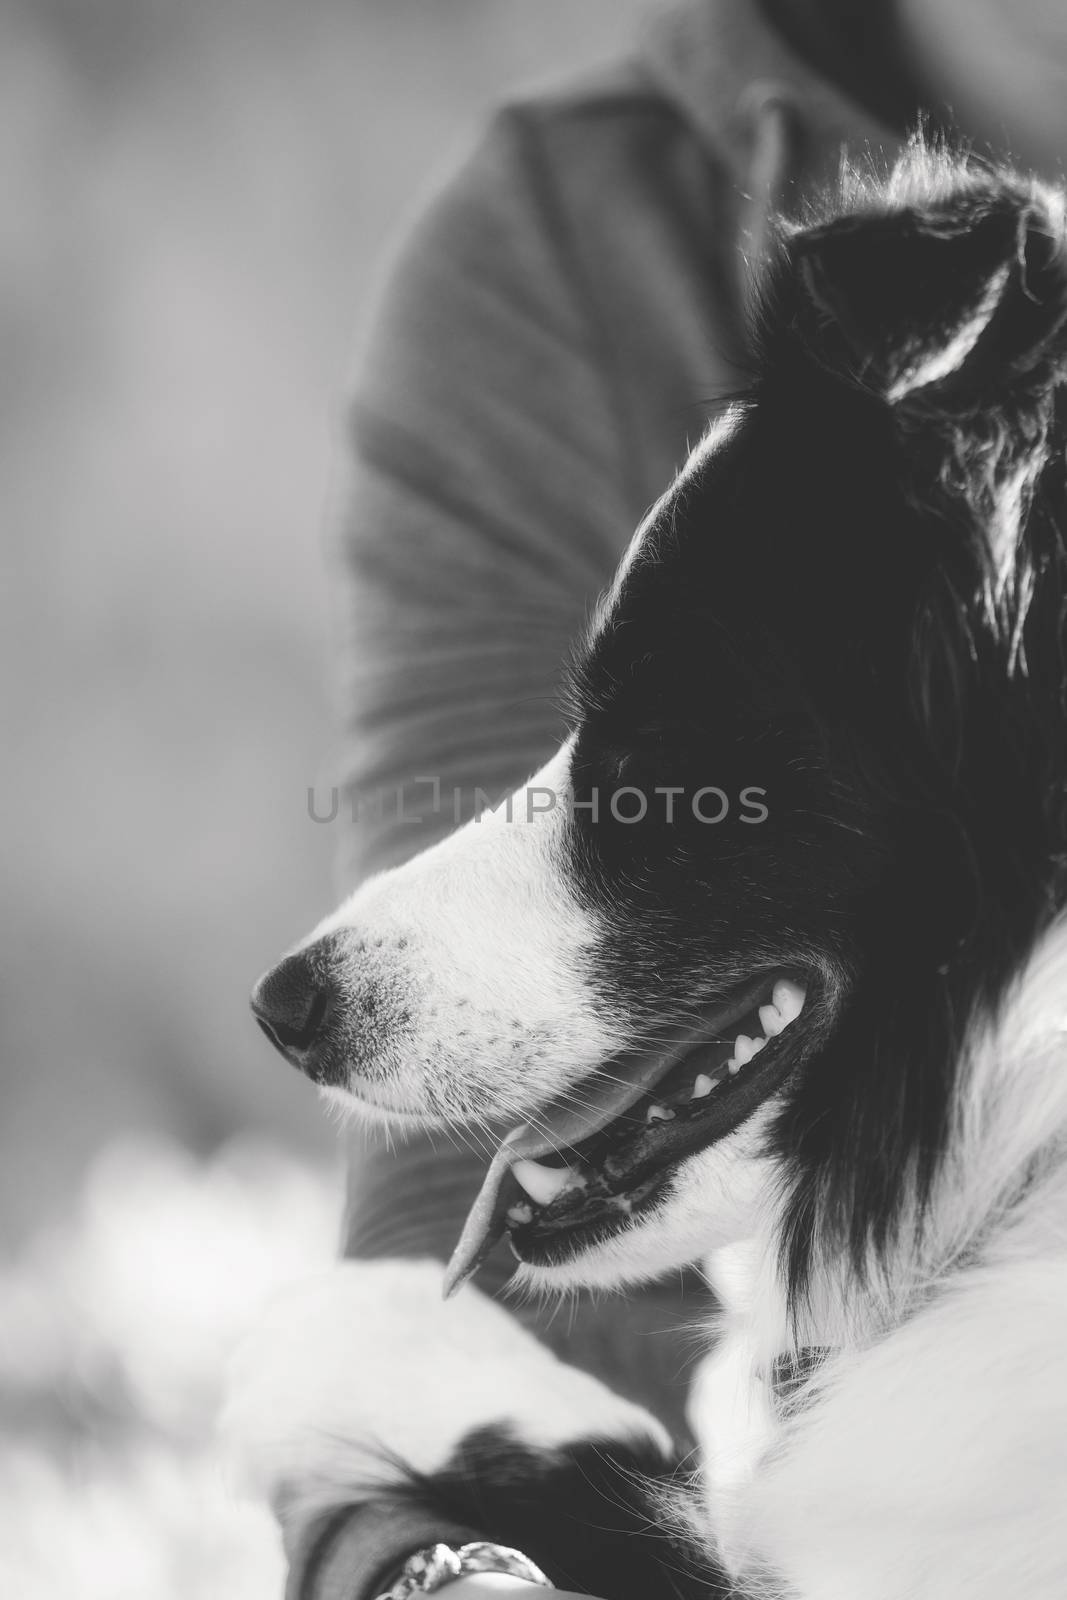 A border collie photographed while hiking in the mountains